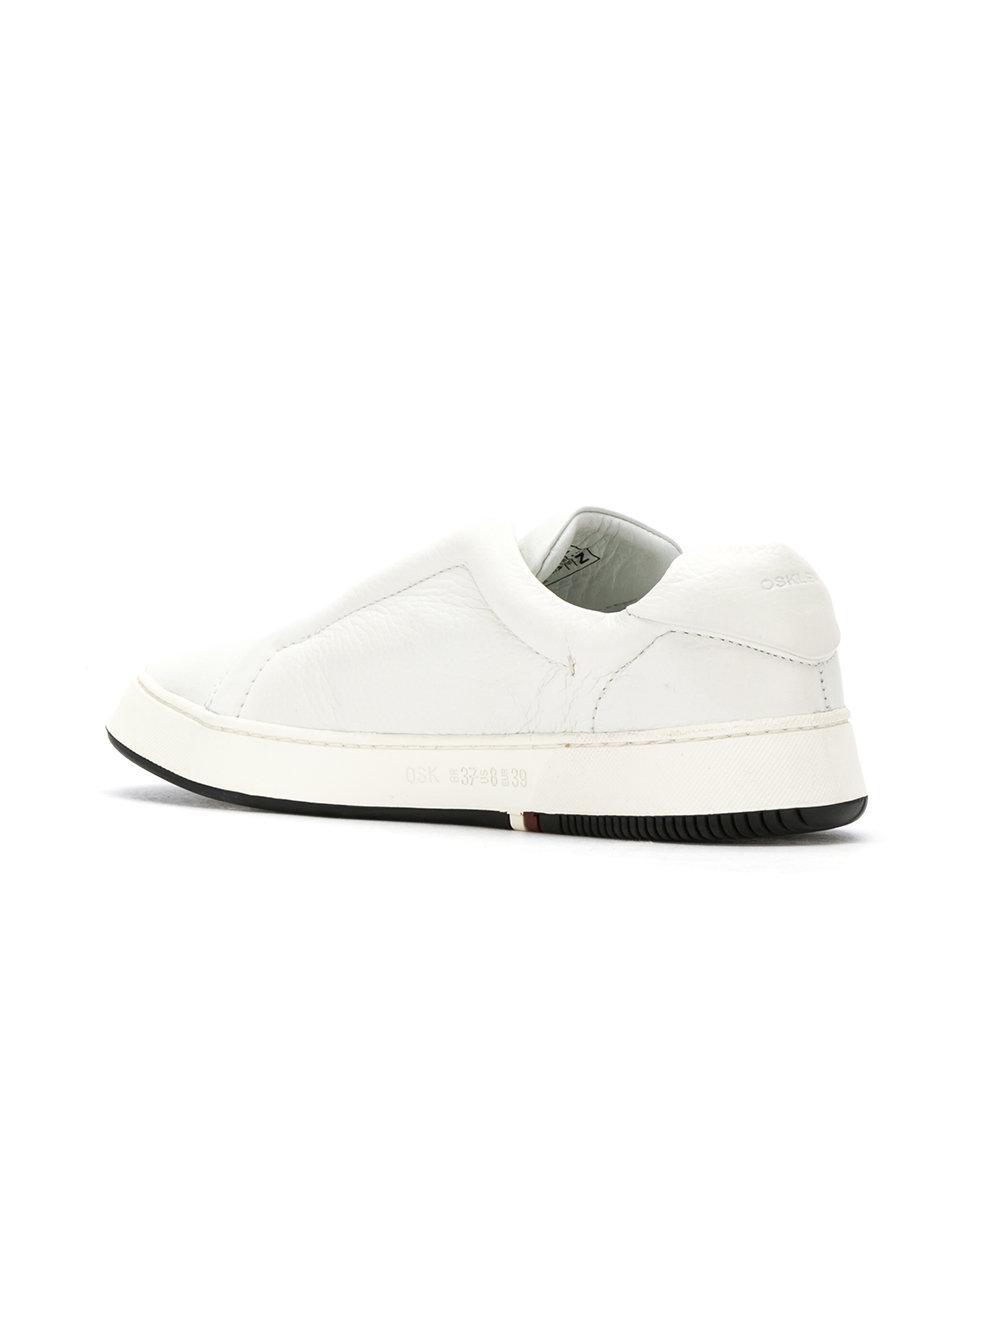 Osklen Leather Laceless Sneakers in White for Men - Lyst